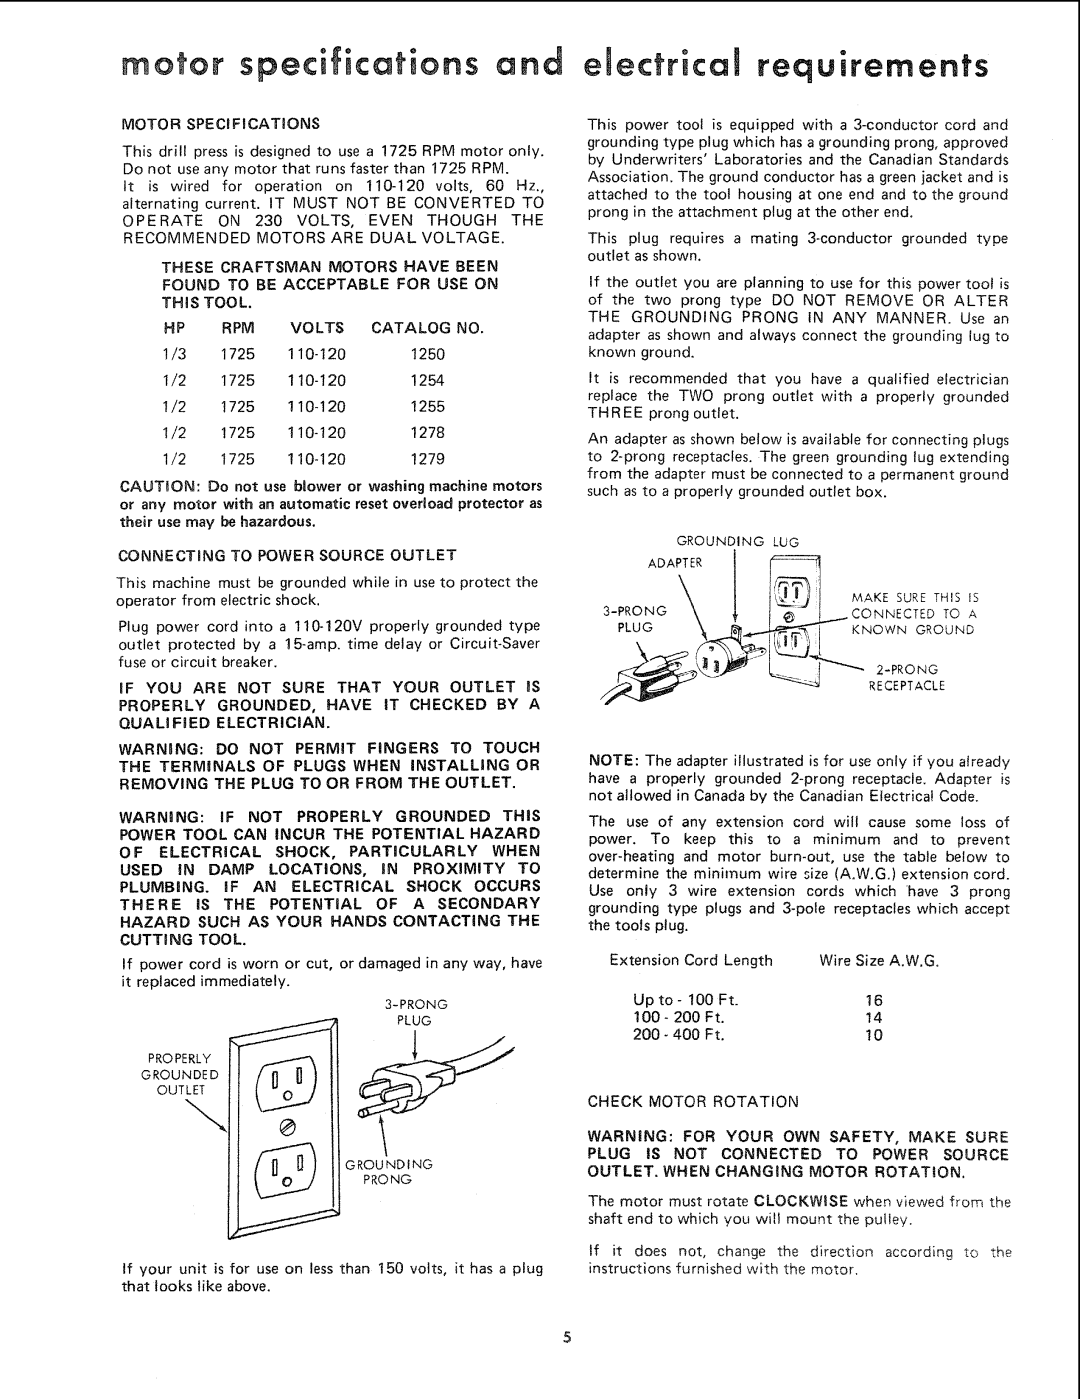 Sears 113.21371 manual motor specifications and, electrical requirements 